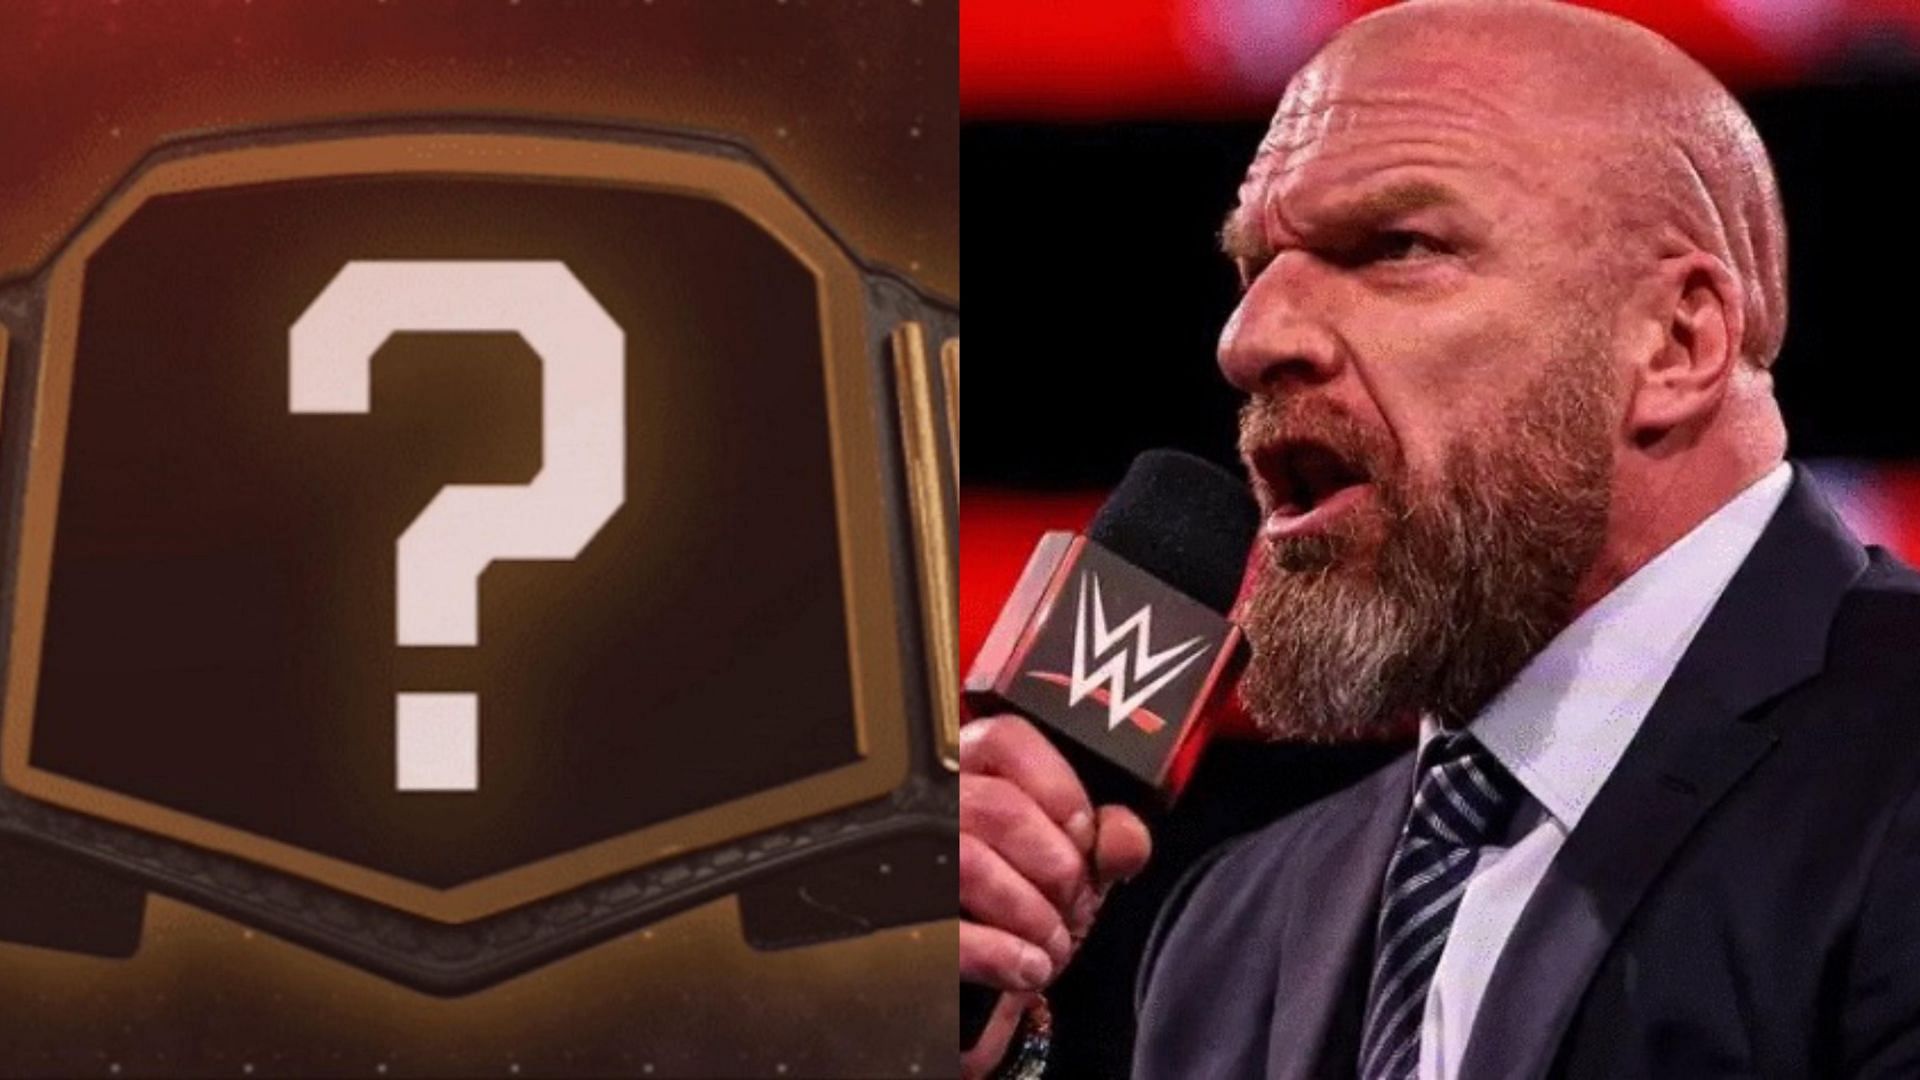 Which new championship would you like to see in WWE?